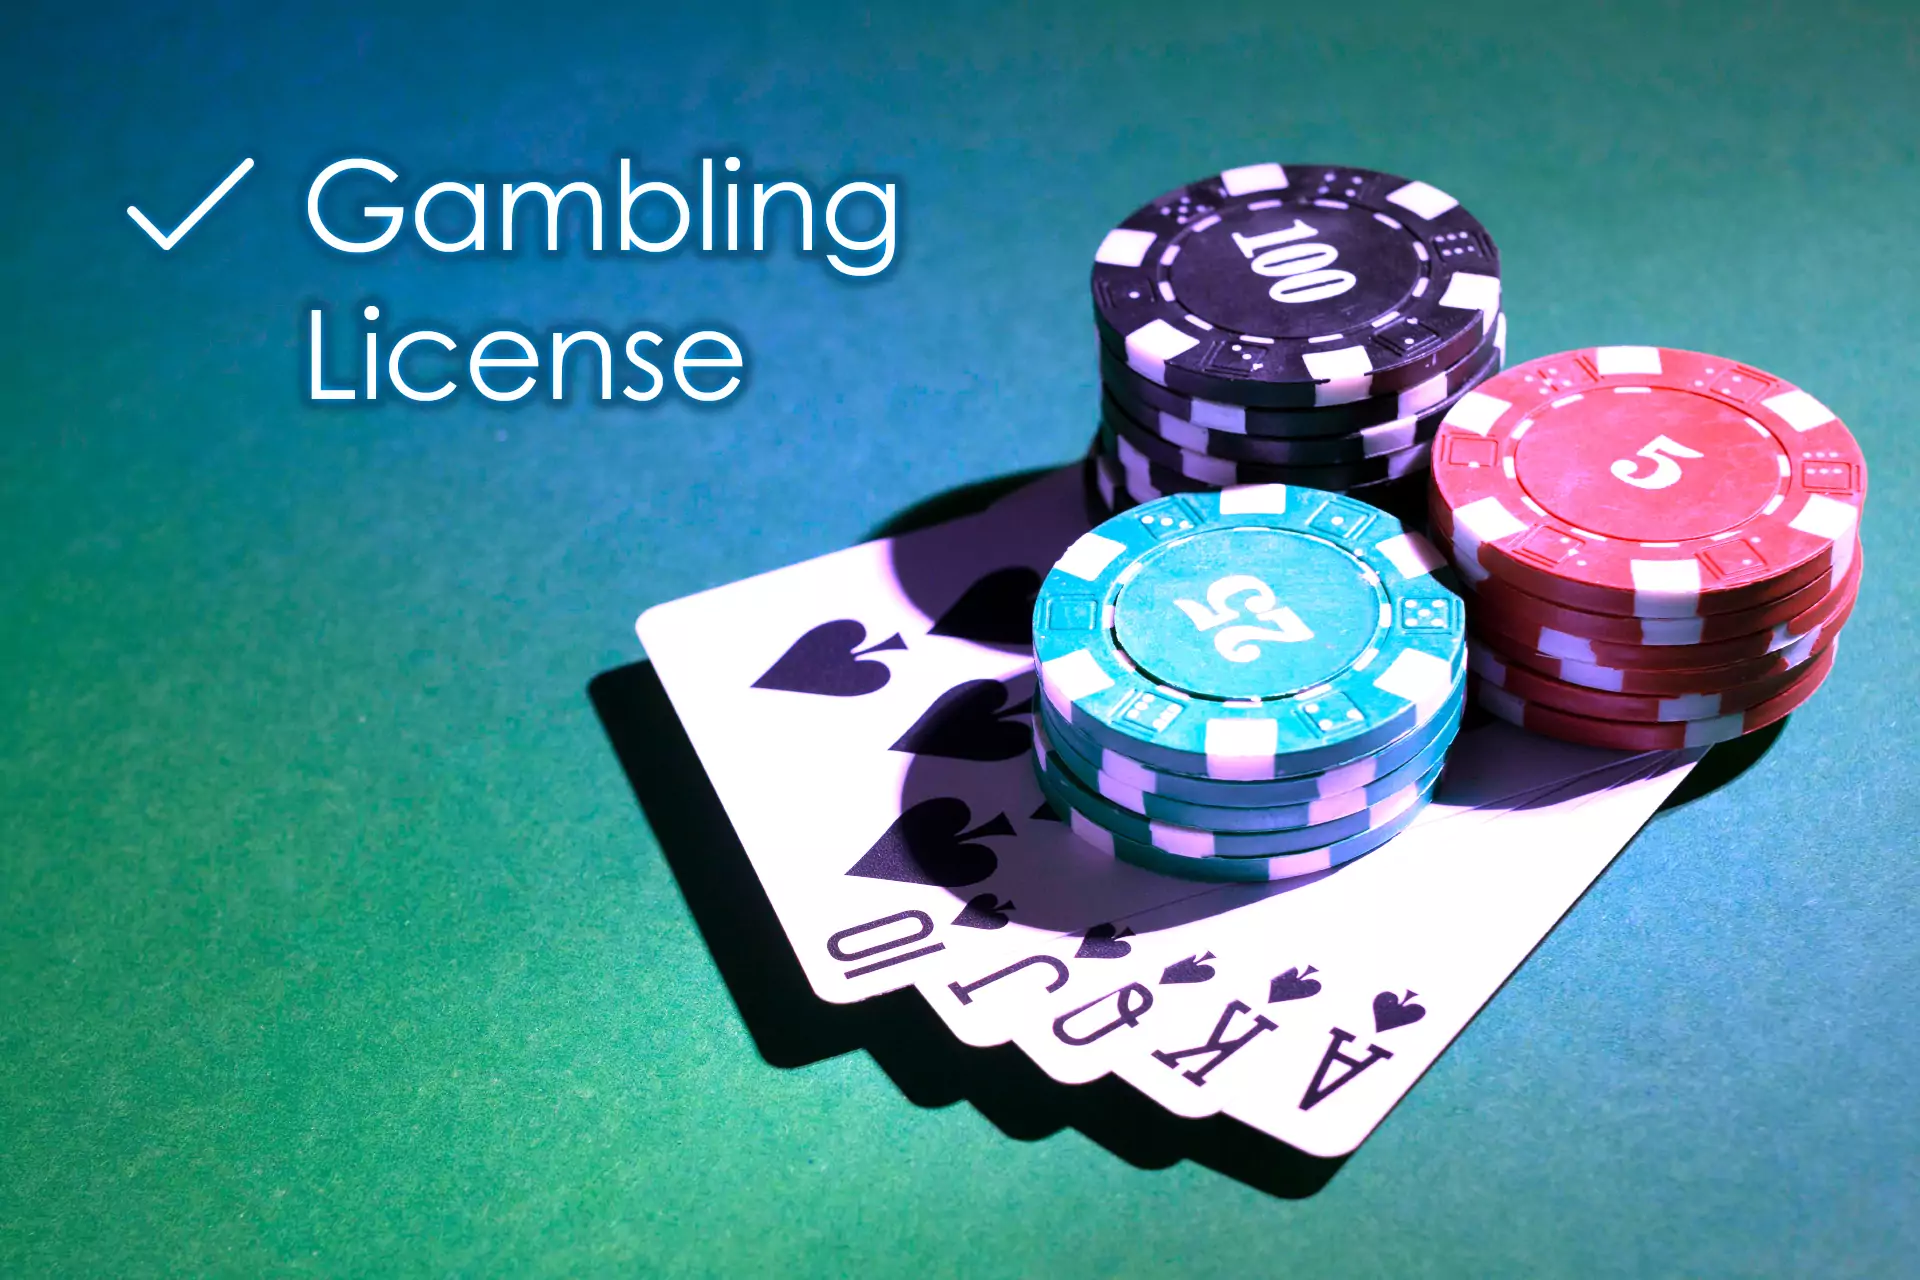 A gambling license allows casinos to organize online games for money.